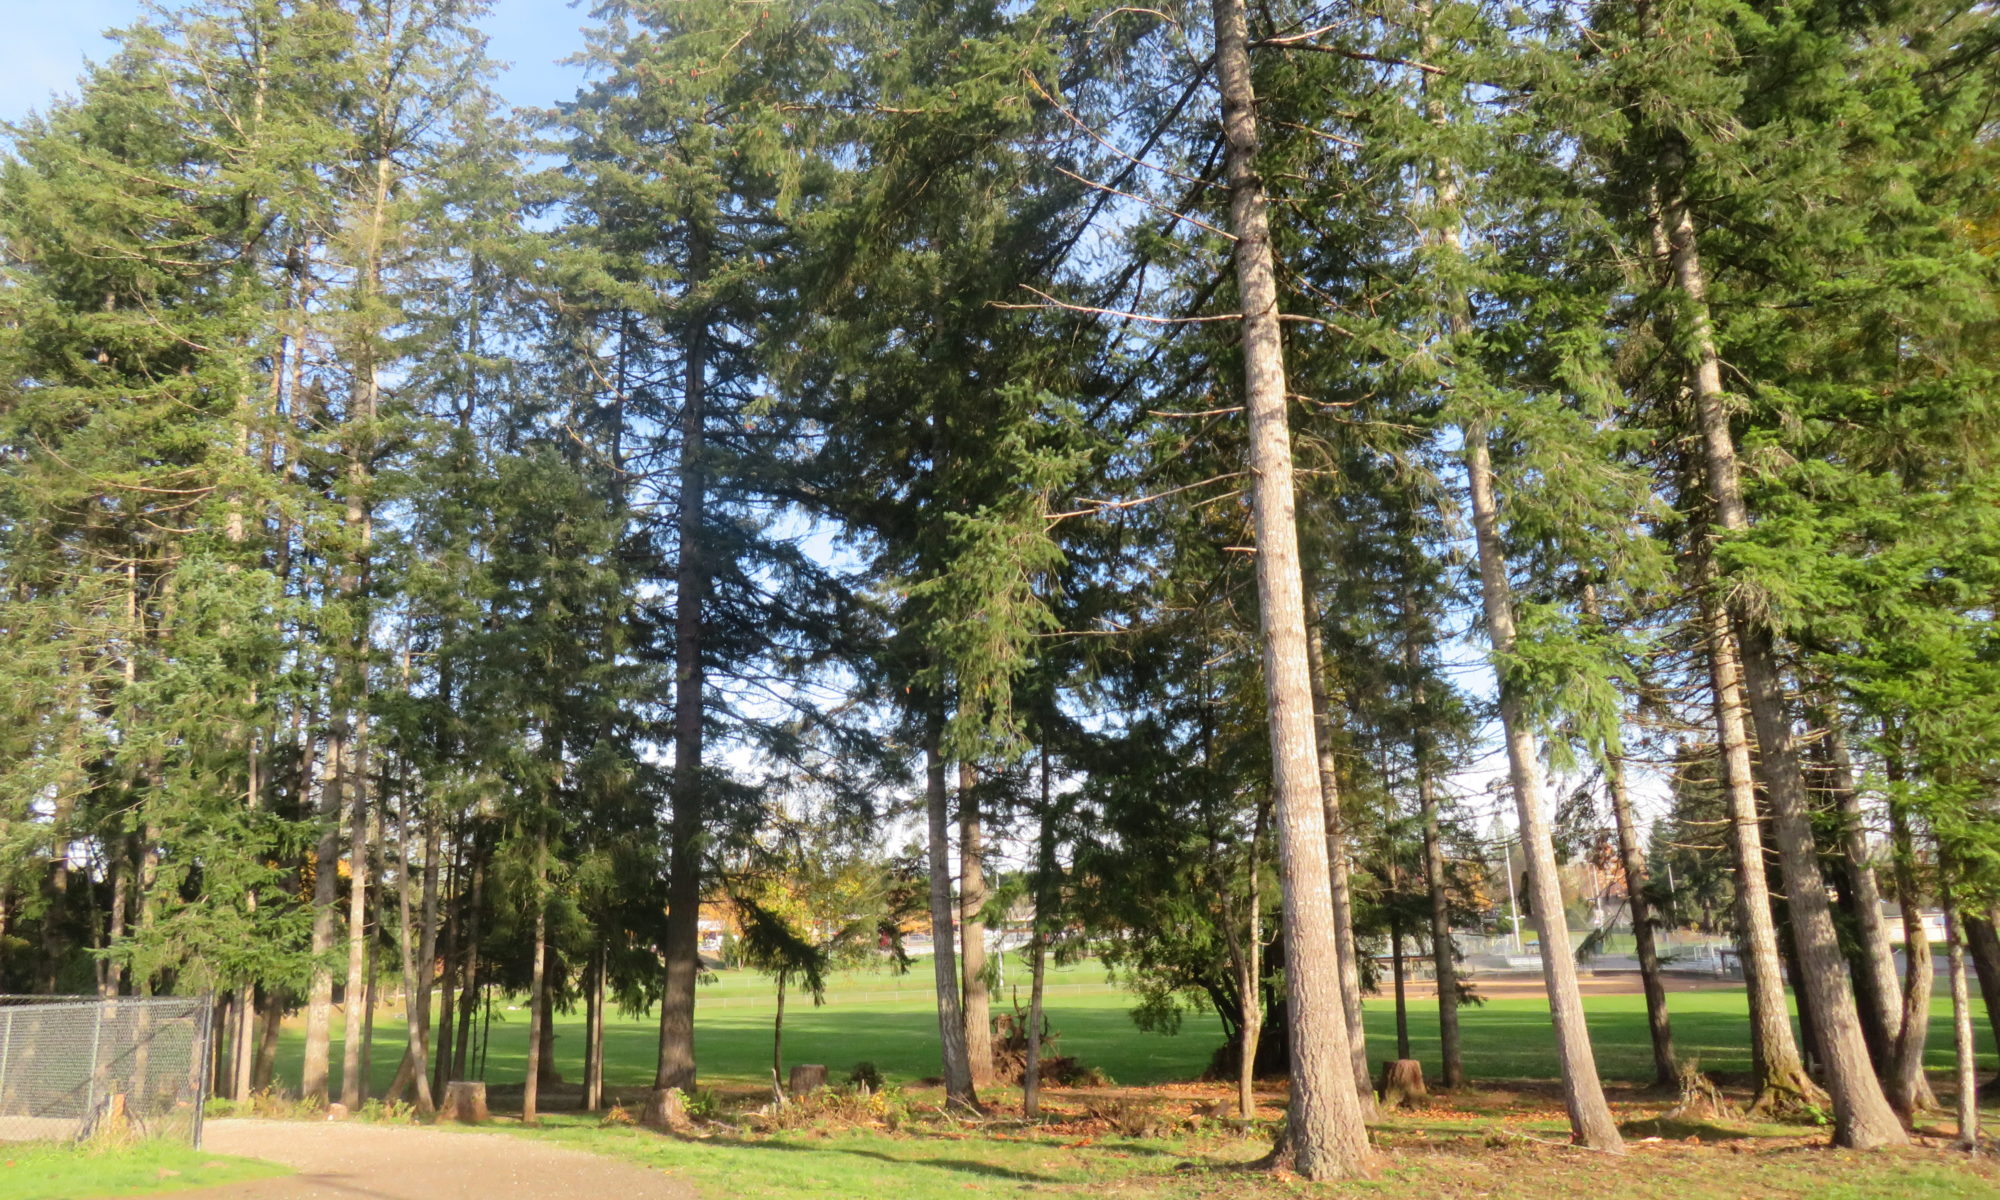 Photo of the trees at Yauger Park in Olympia.